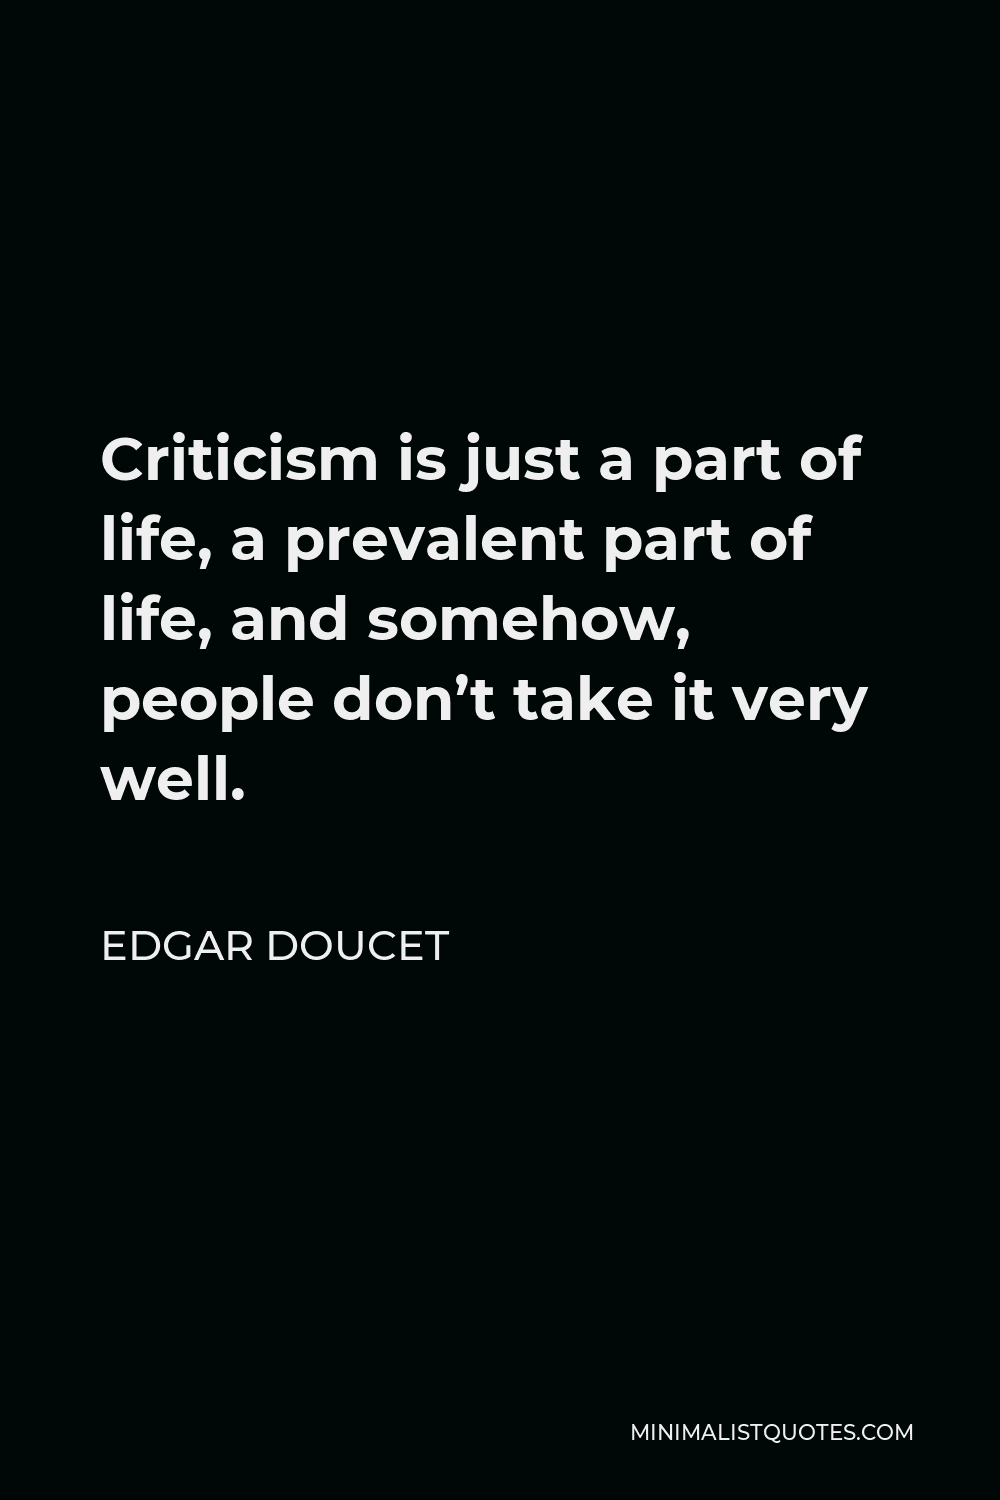 Edgar Doucet Quote - Criticism is just a part of life, a prevalent part of life, and somehow, people don’t take it very well.